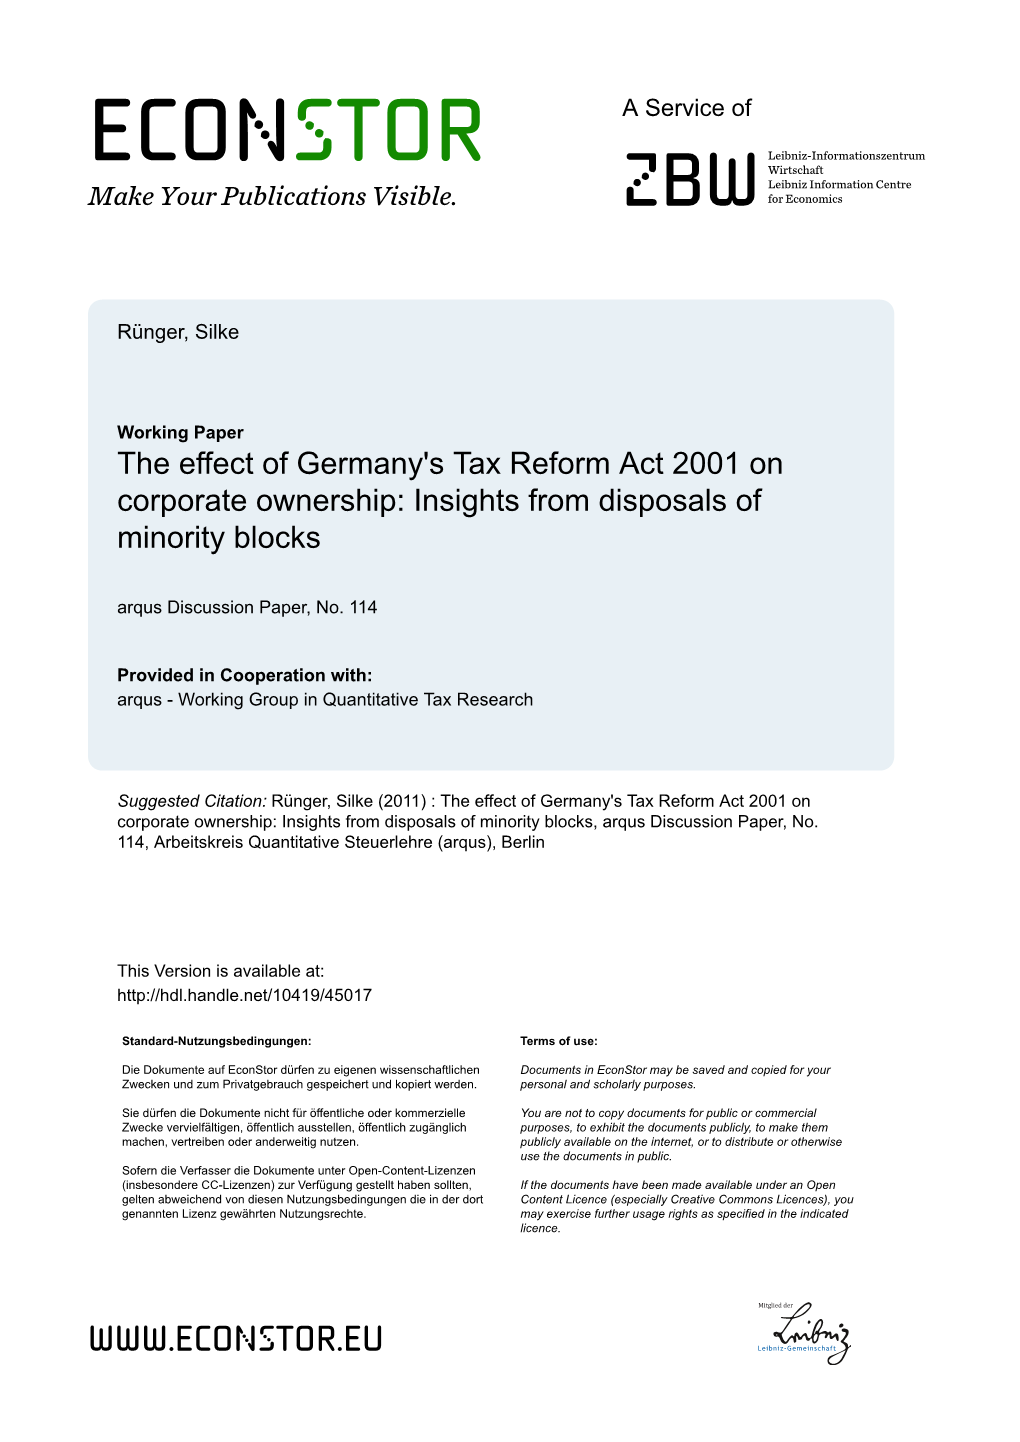 The Effect of Germany's Tax Reform Act 2001 on Corporate Ownership: Insights from Disposals of Minority Blocks